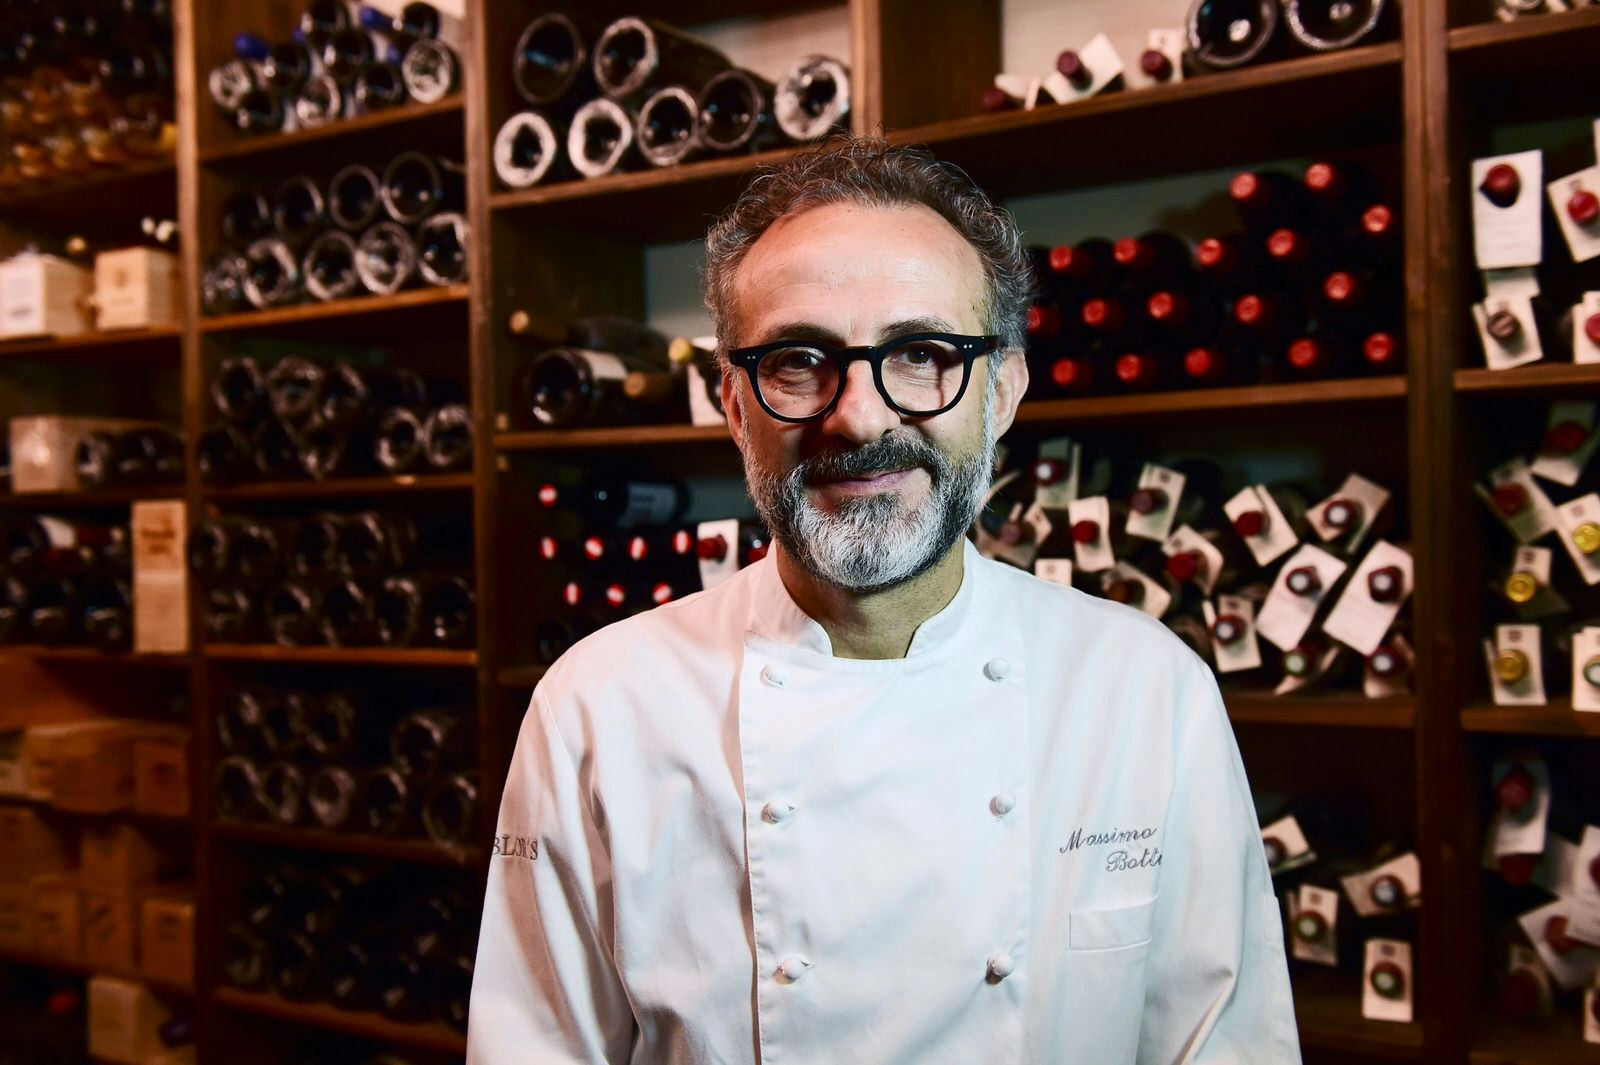 A picture of Italian chef Massimo Bottura posing in his restaurant Osteria Francescana in Modena in front of the extensive wine cellar